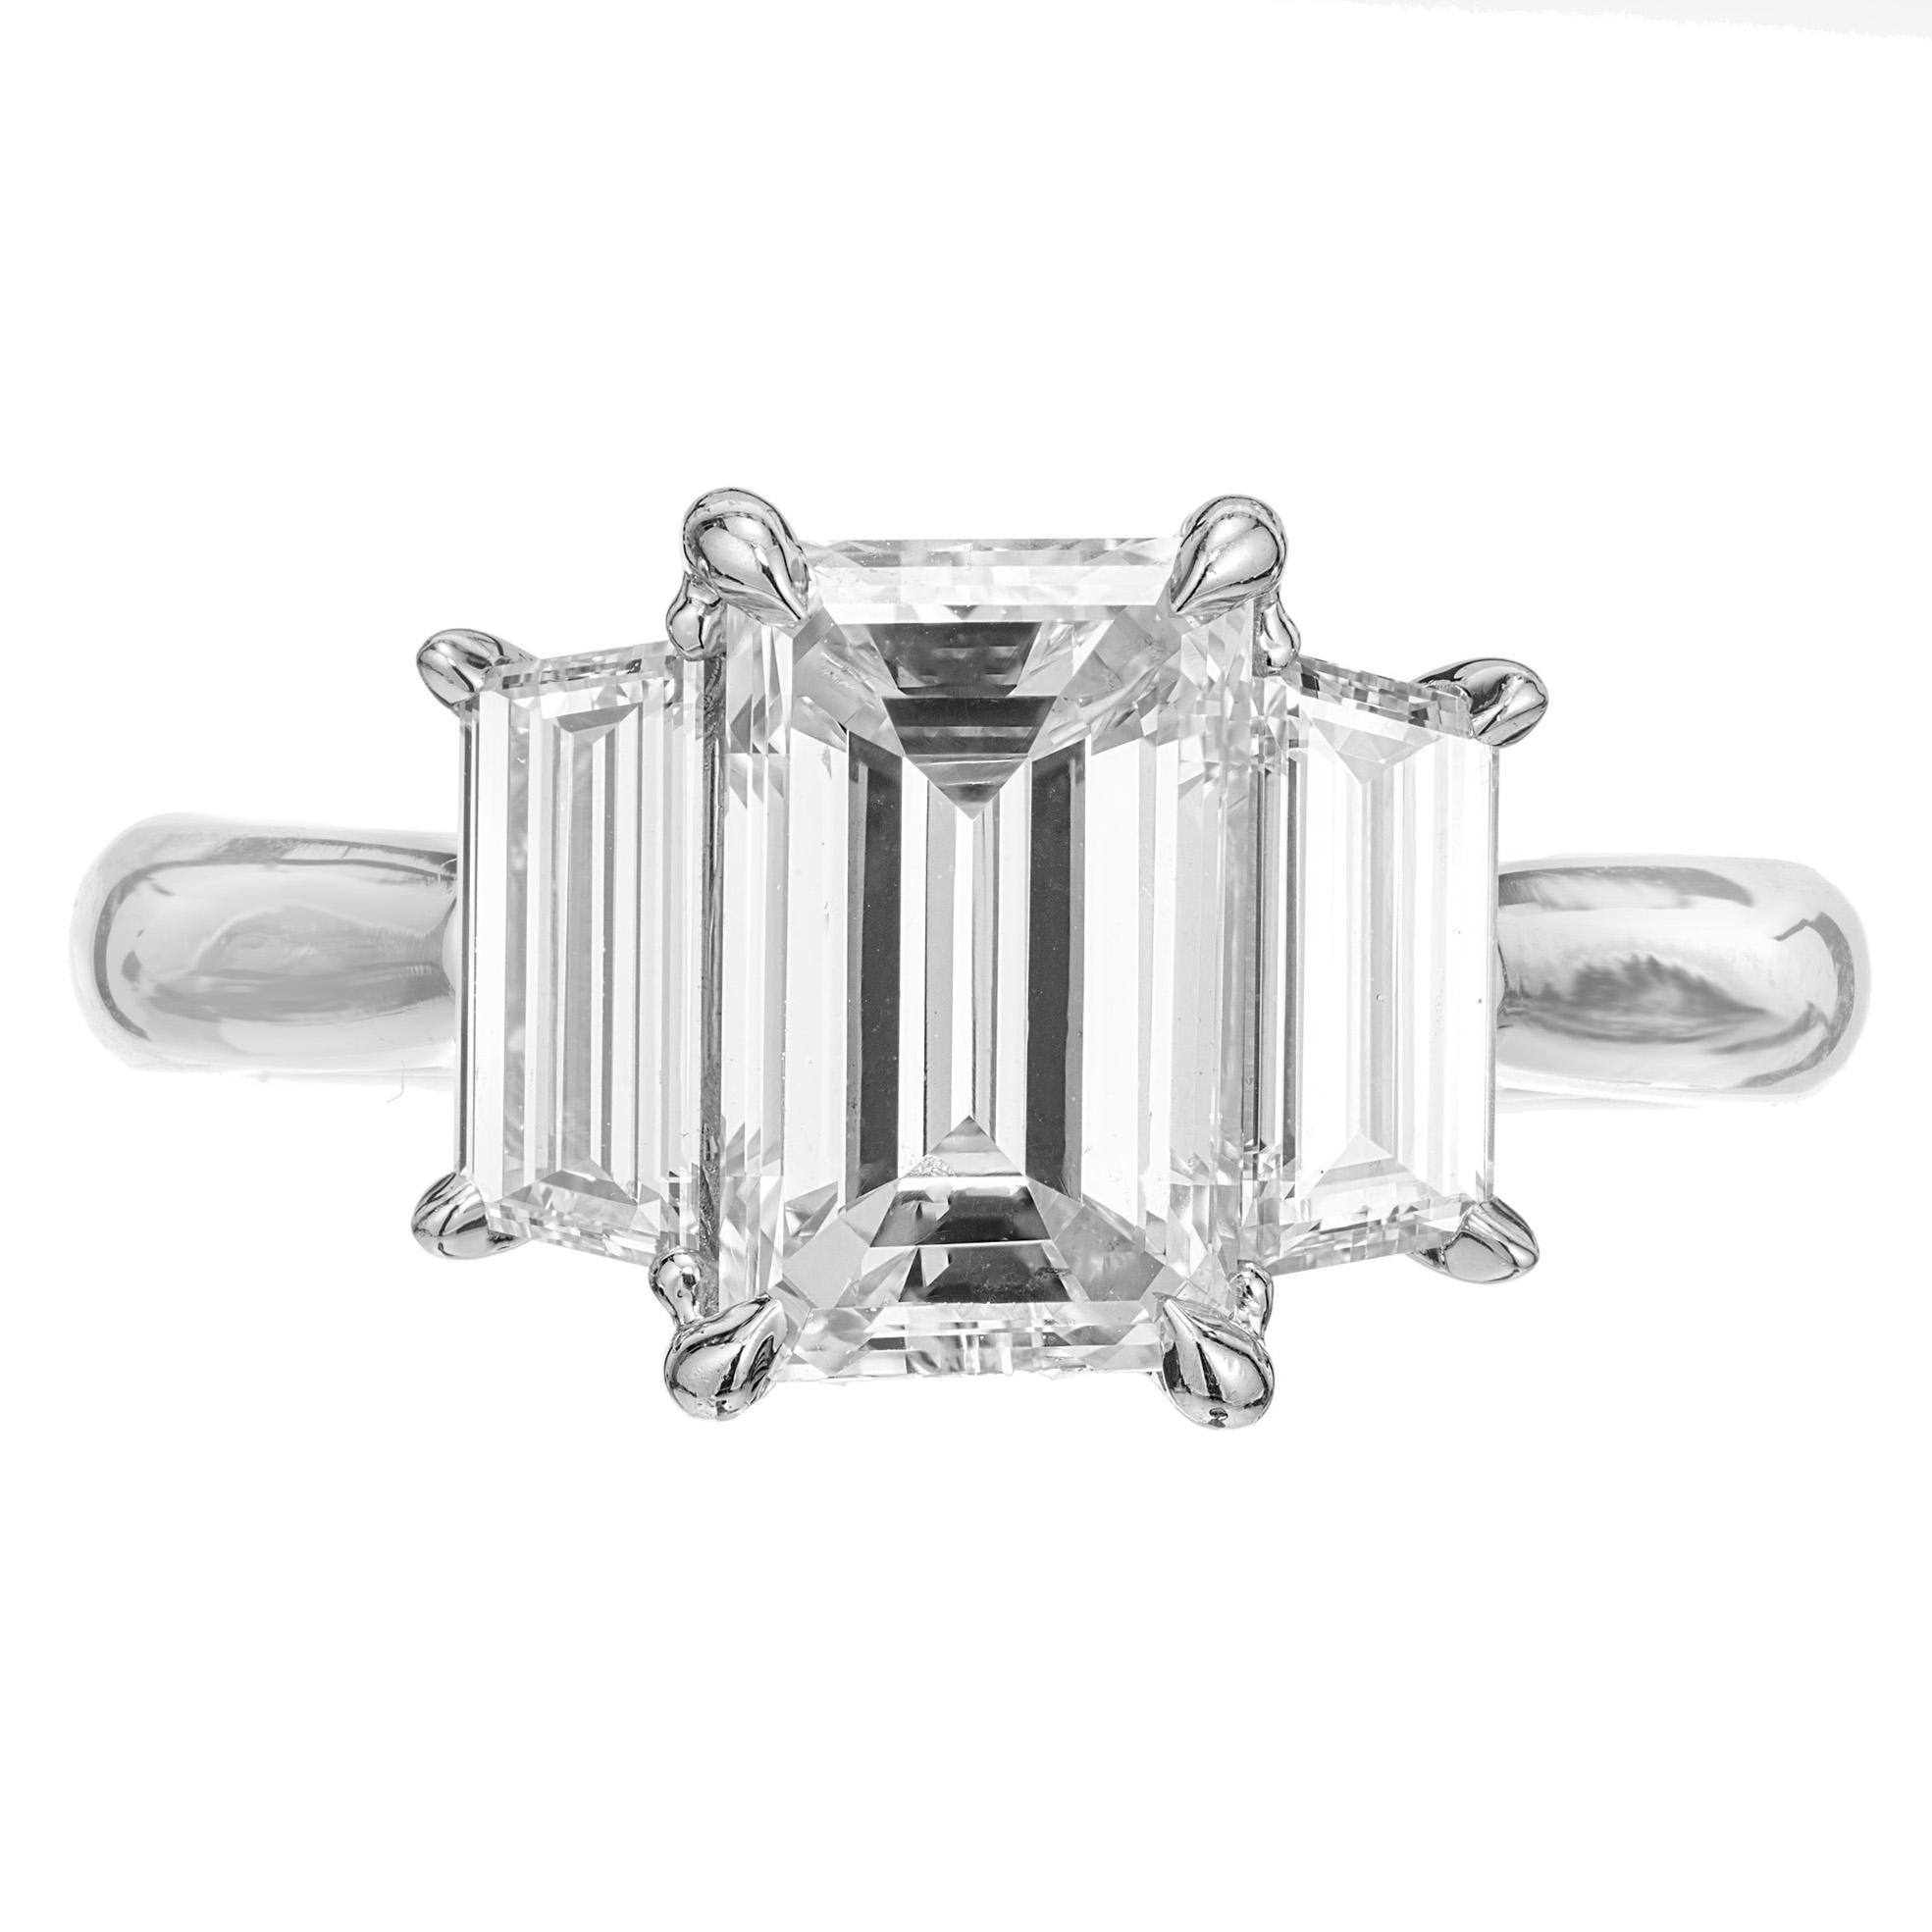 Diamond engagement ring. GIA certified 2.41ct emerald cut diamond in a platinum three-stone setting with two elongated step cut trapezoid side diamonds. Created in the Peter Suchy Workshop. 

One emerald cut diamond, approx. total weight 2.41cts, F,